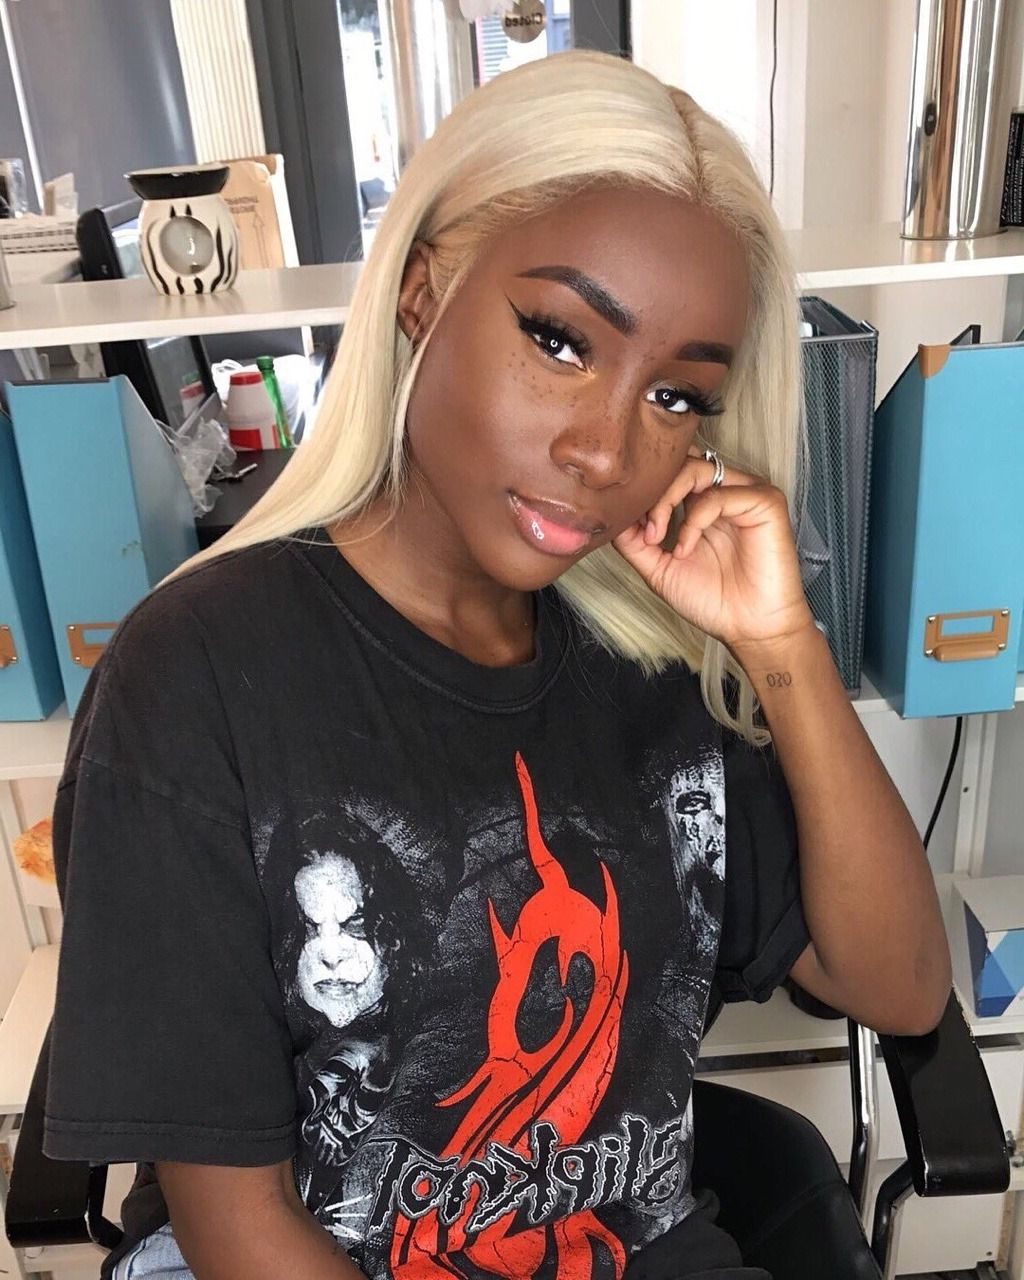 Bleached Yellow Blonde. 7 e1599165430274 +35 Hottest Hair Color Trends for Dark-Skinned Women - 28